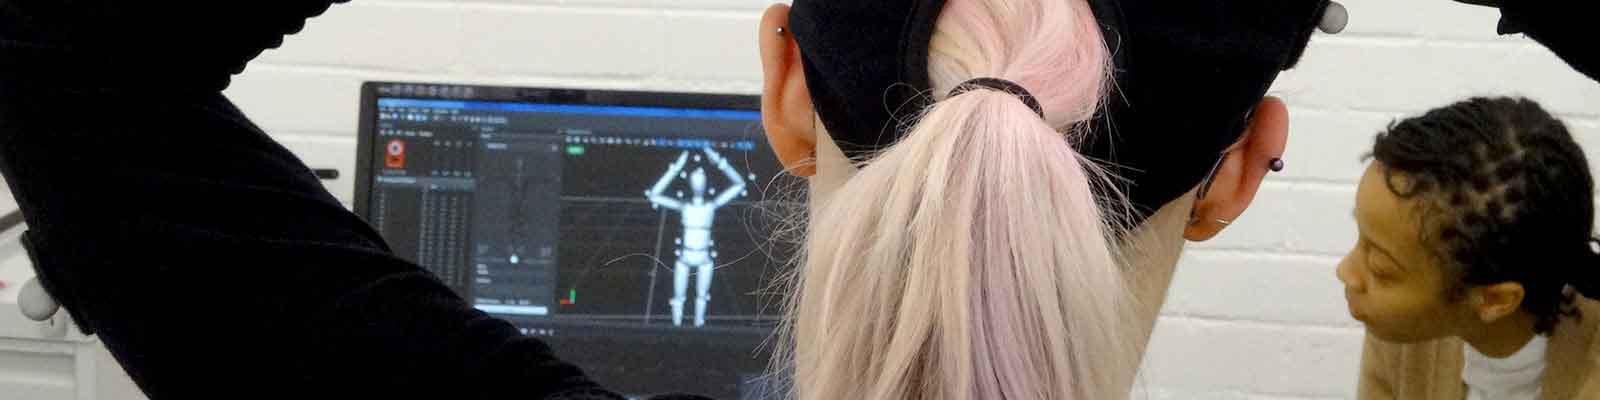 Game Design students using motion capture.